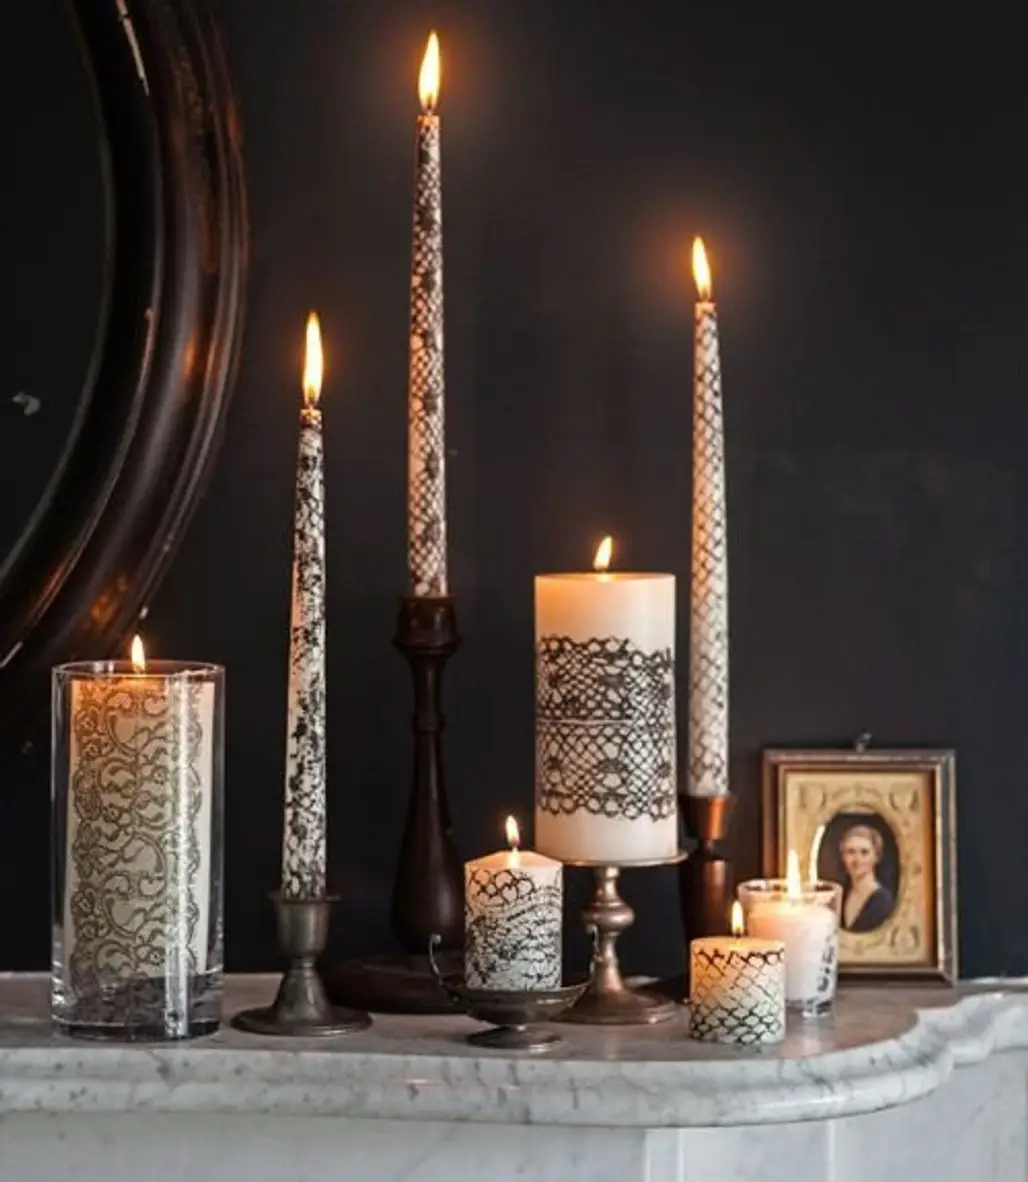 Lace Covered Candles